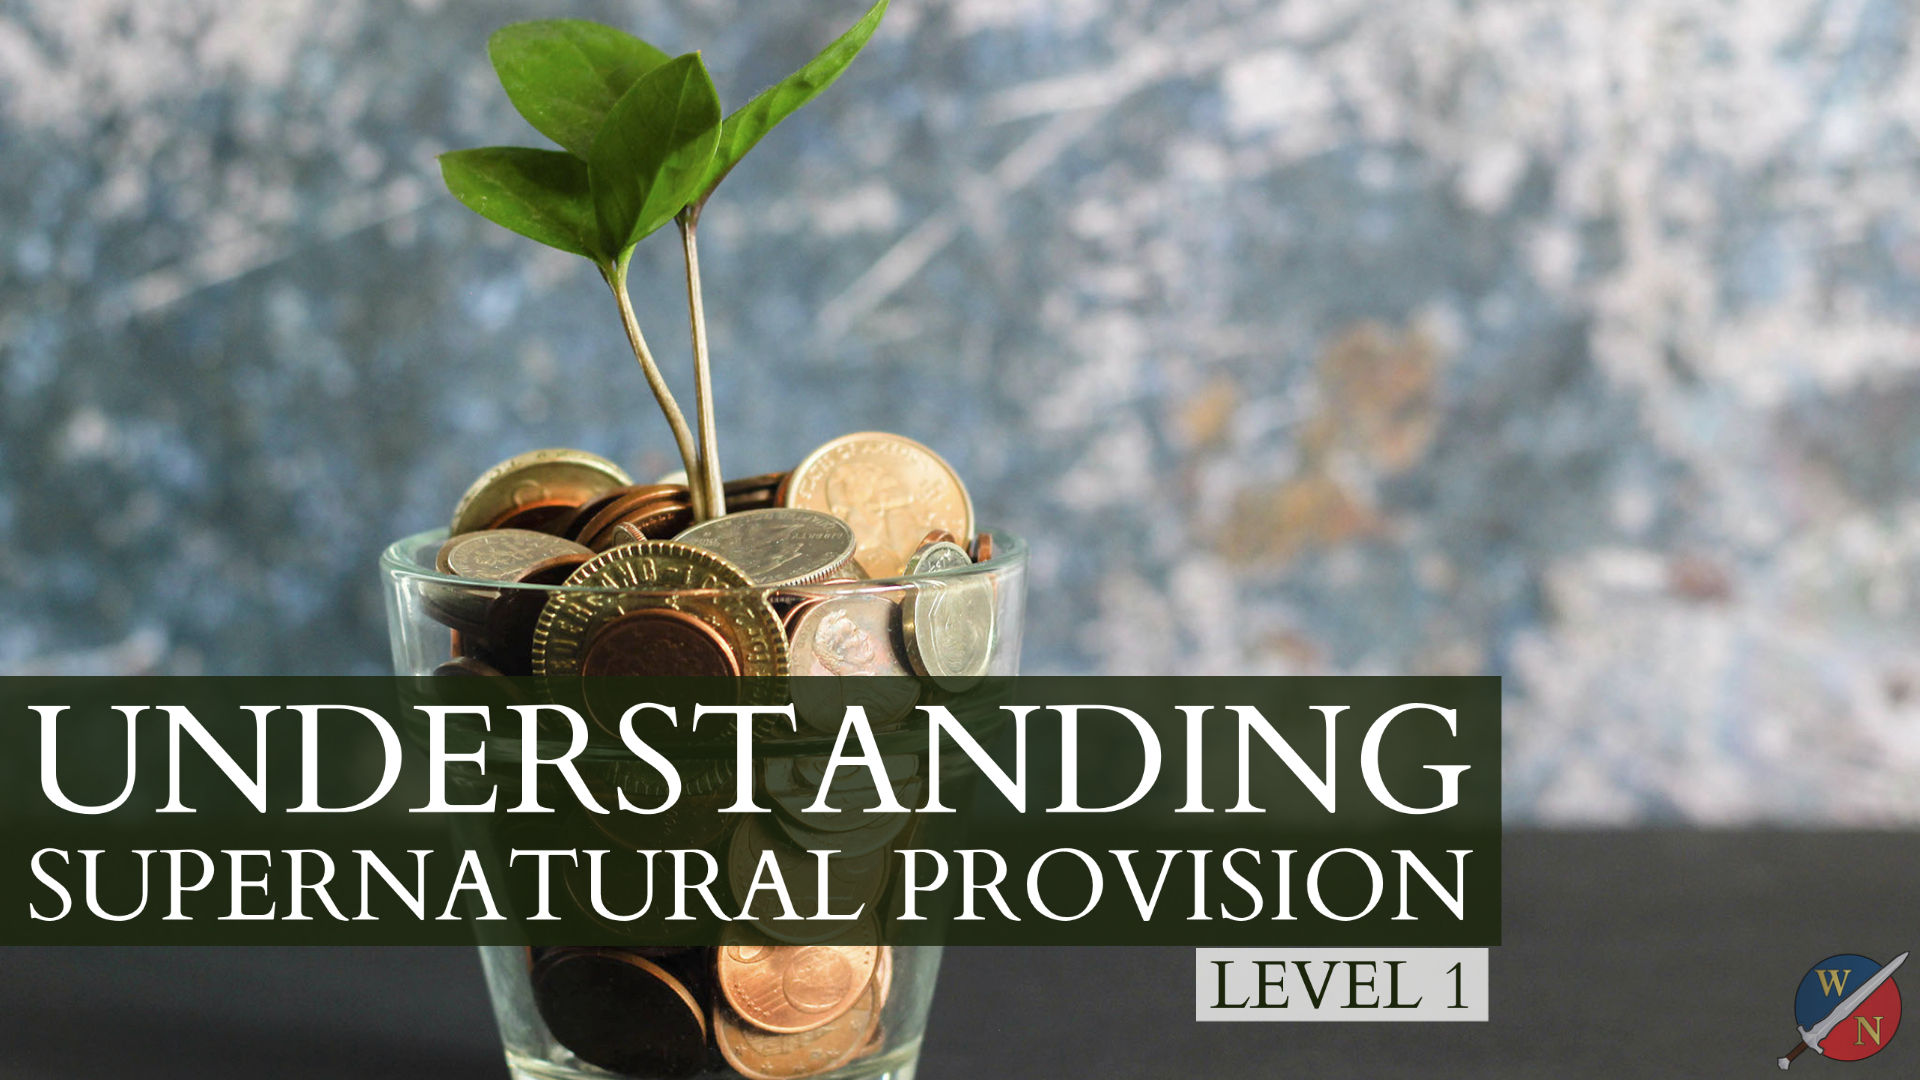 Understanding Supernatural Provision by Dr. Kevin Zadai